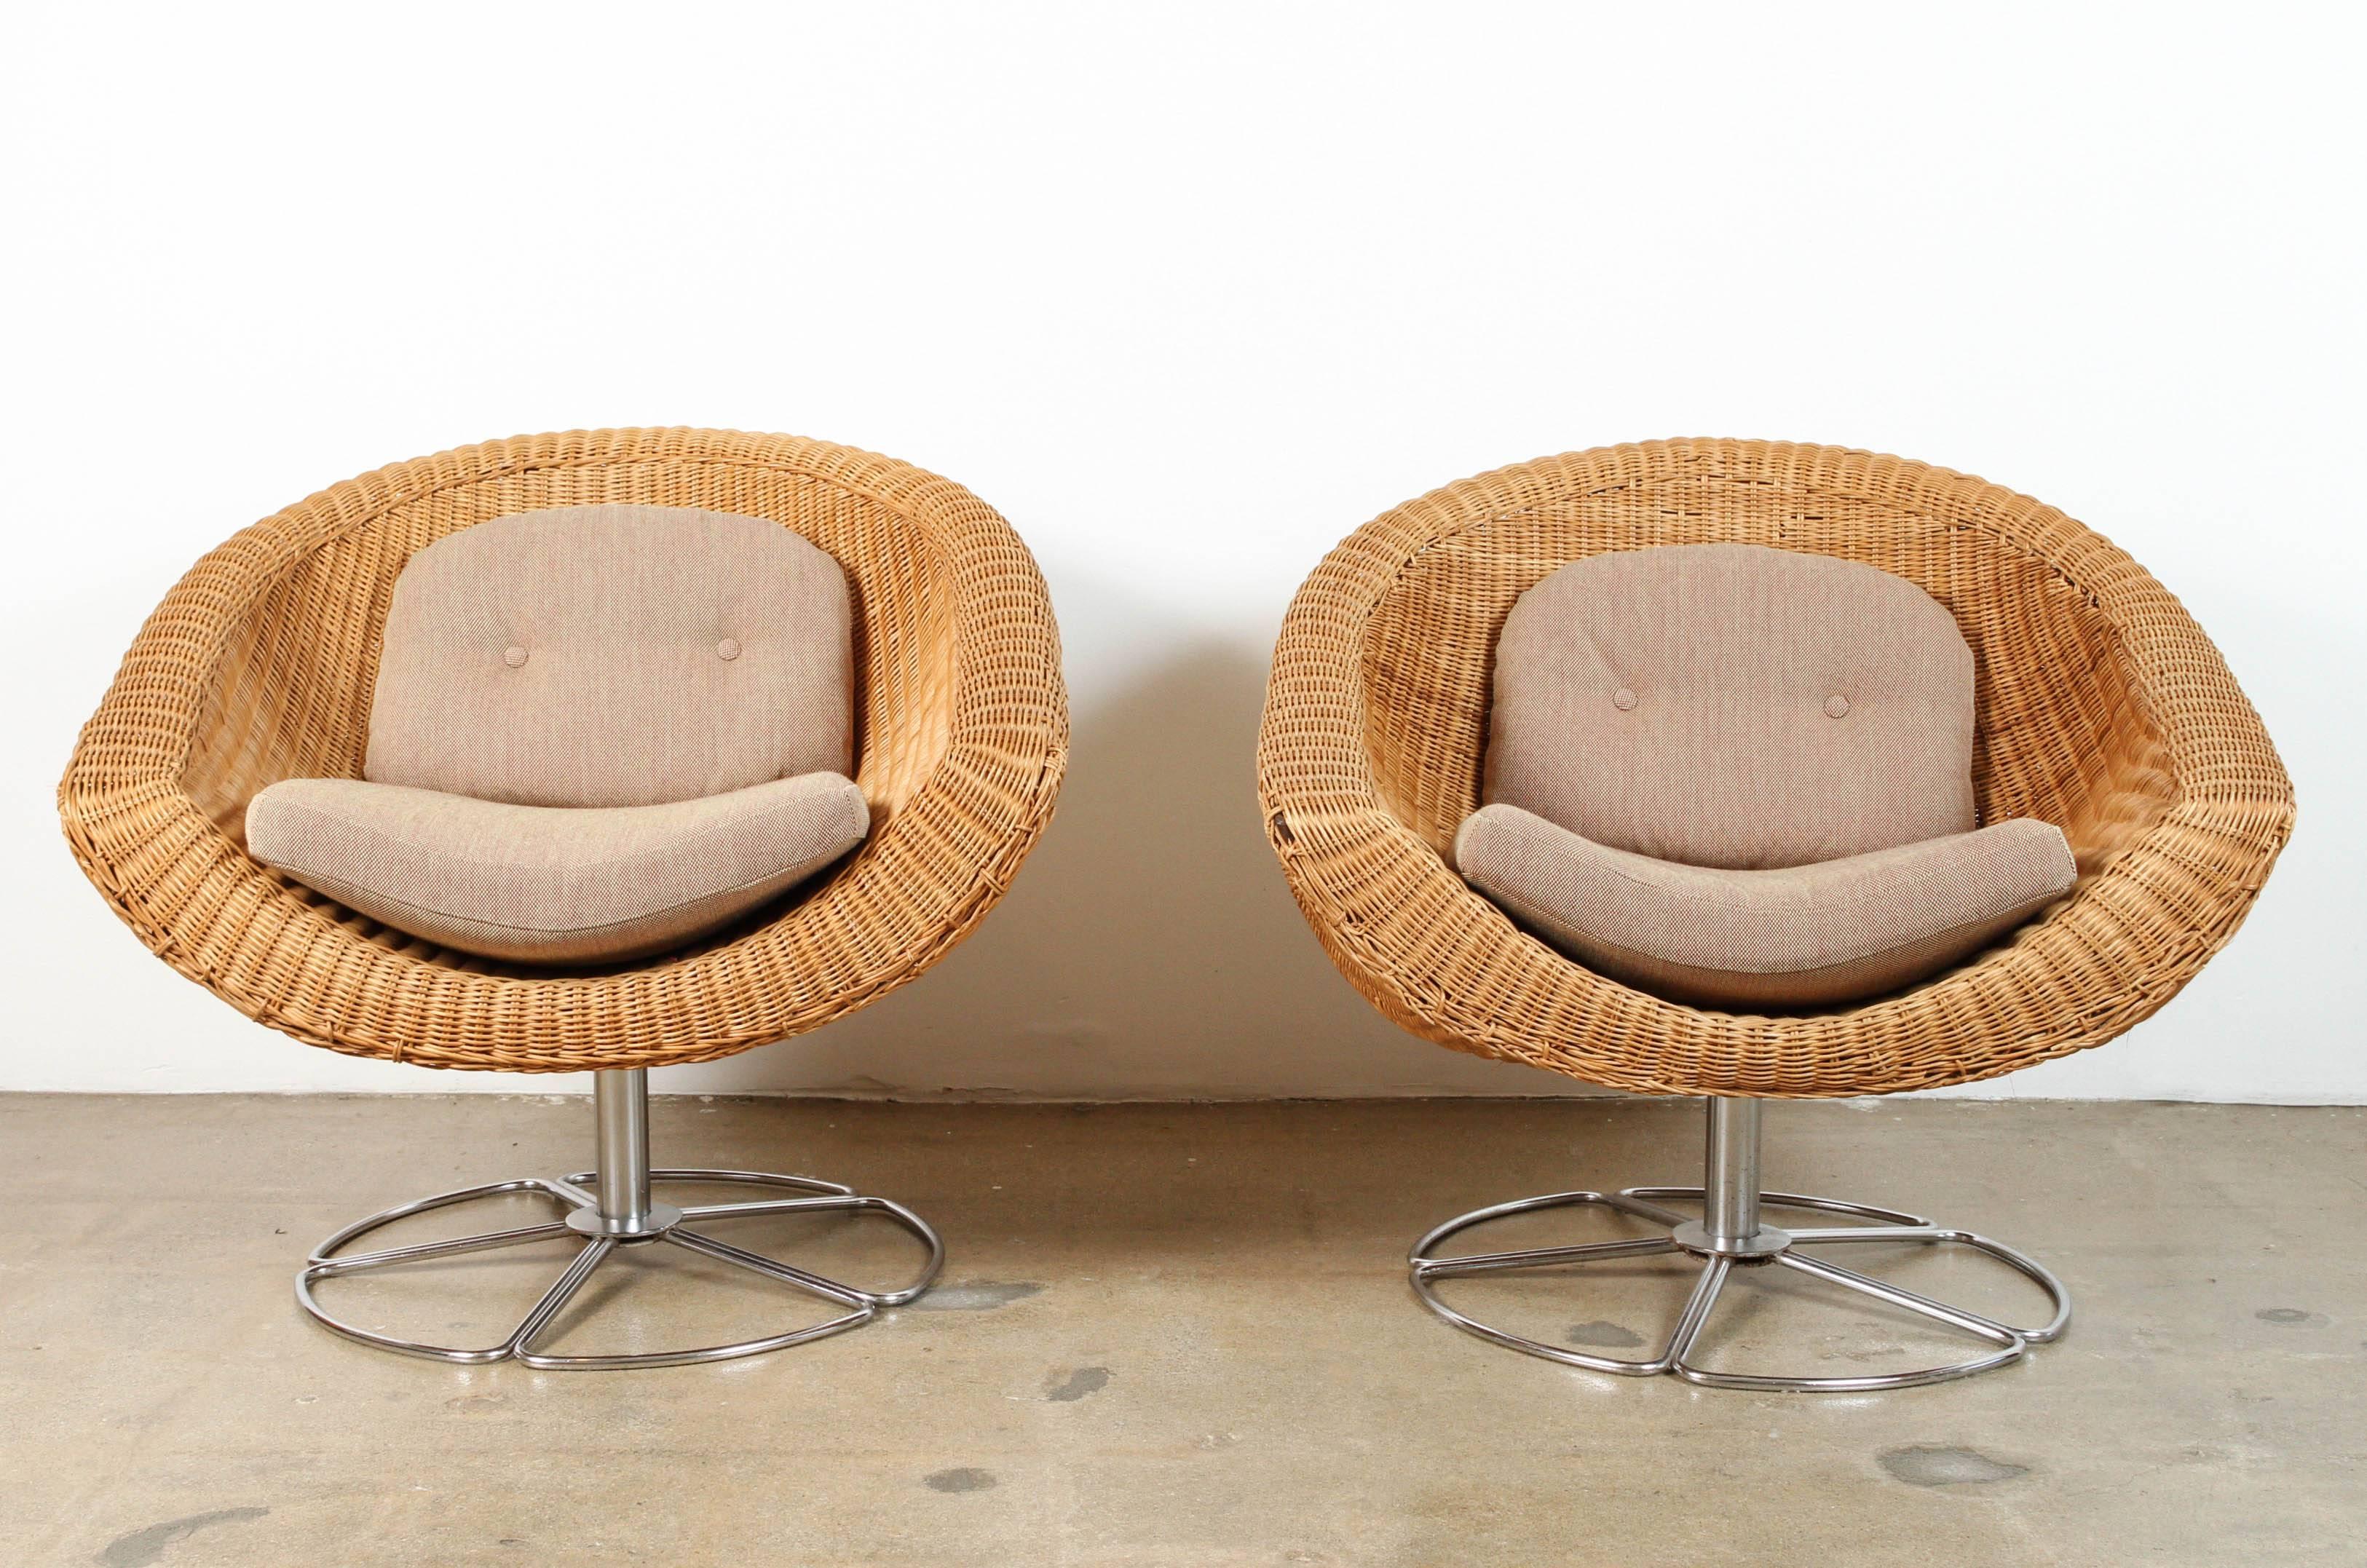 Pair of 1960s, vintage Wicker swivel chairs. Cushions in a sturdy cotton beige with deep orange/red highlights. Very unique and quite comfortable. One of a kind!